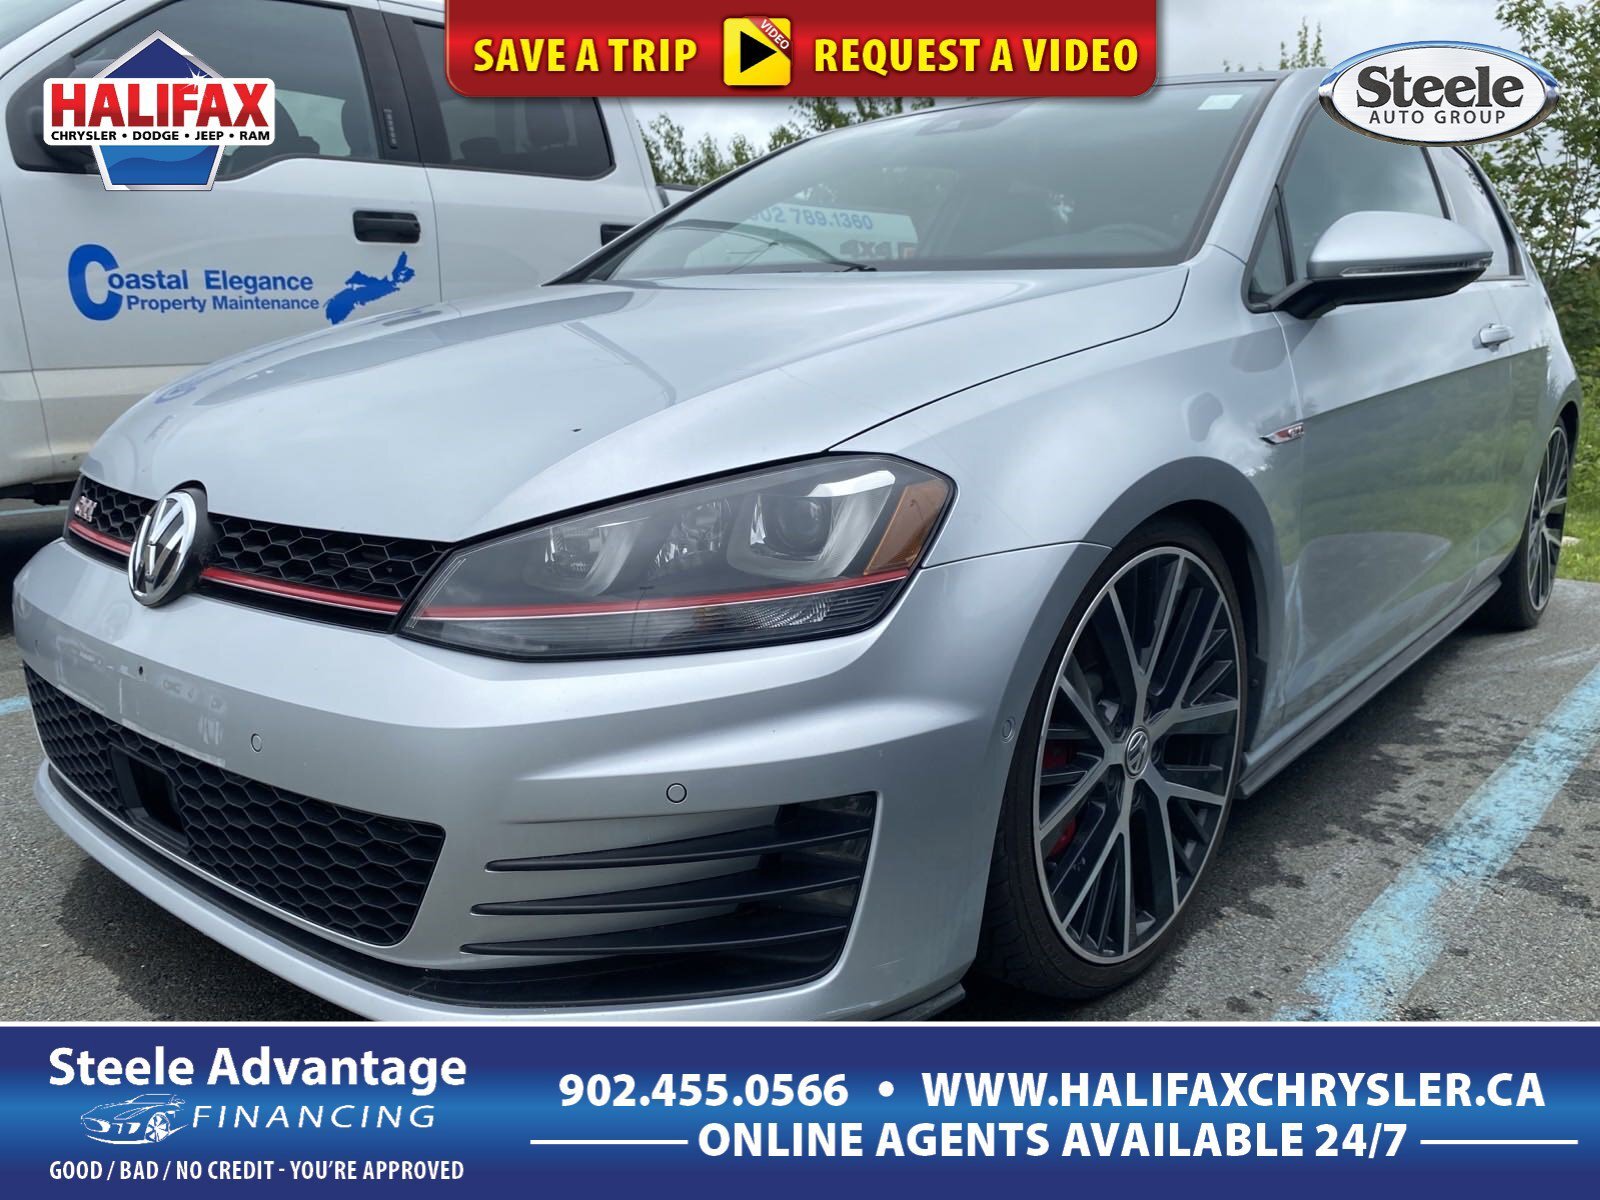 2016 Volkswagen Golf GTI Performance - LOW KM, AUTOMATIC, SUNROOF, HEATED S